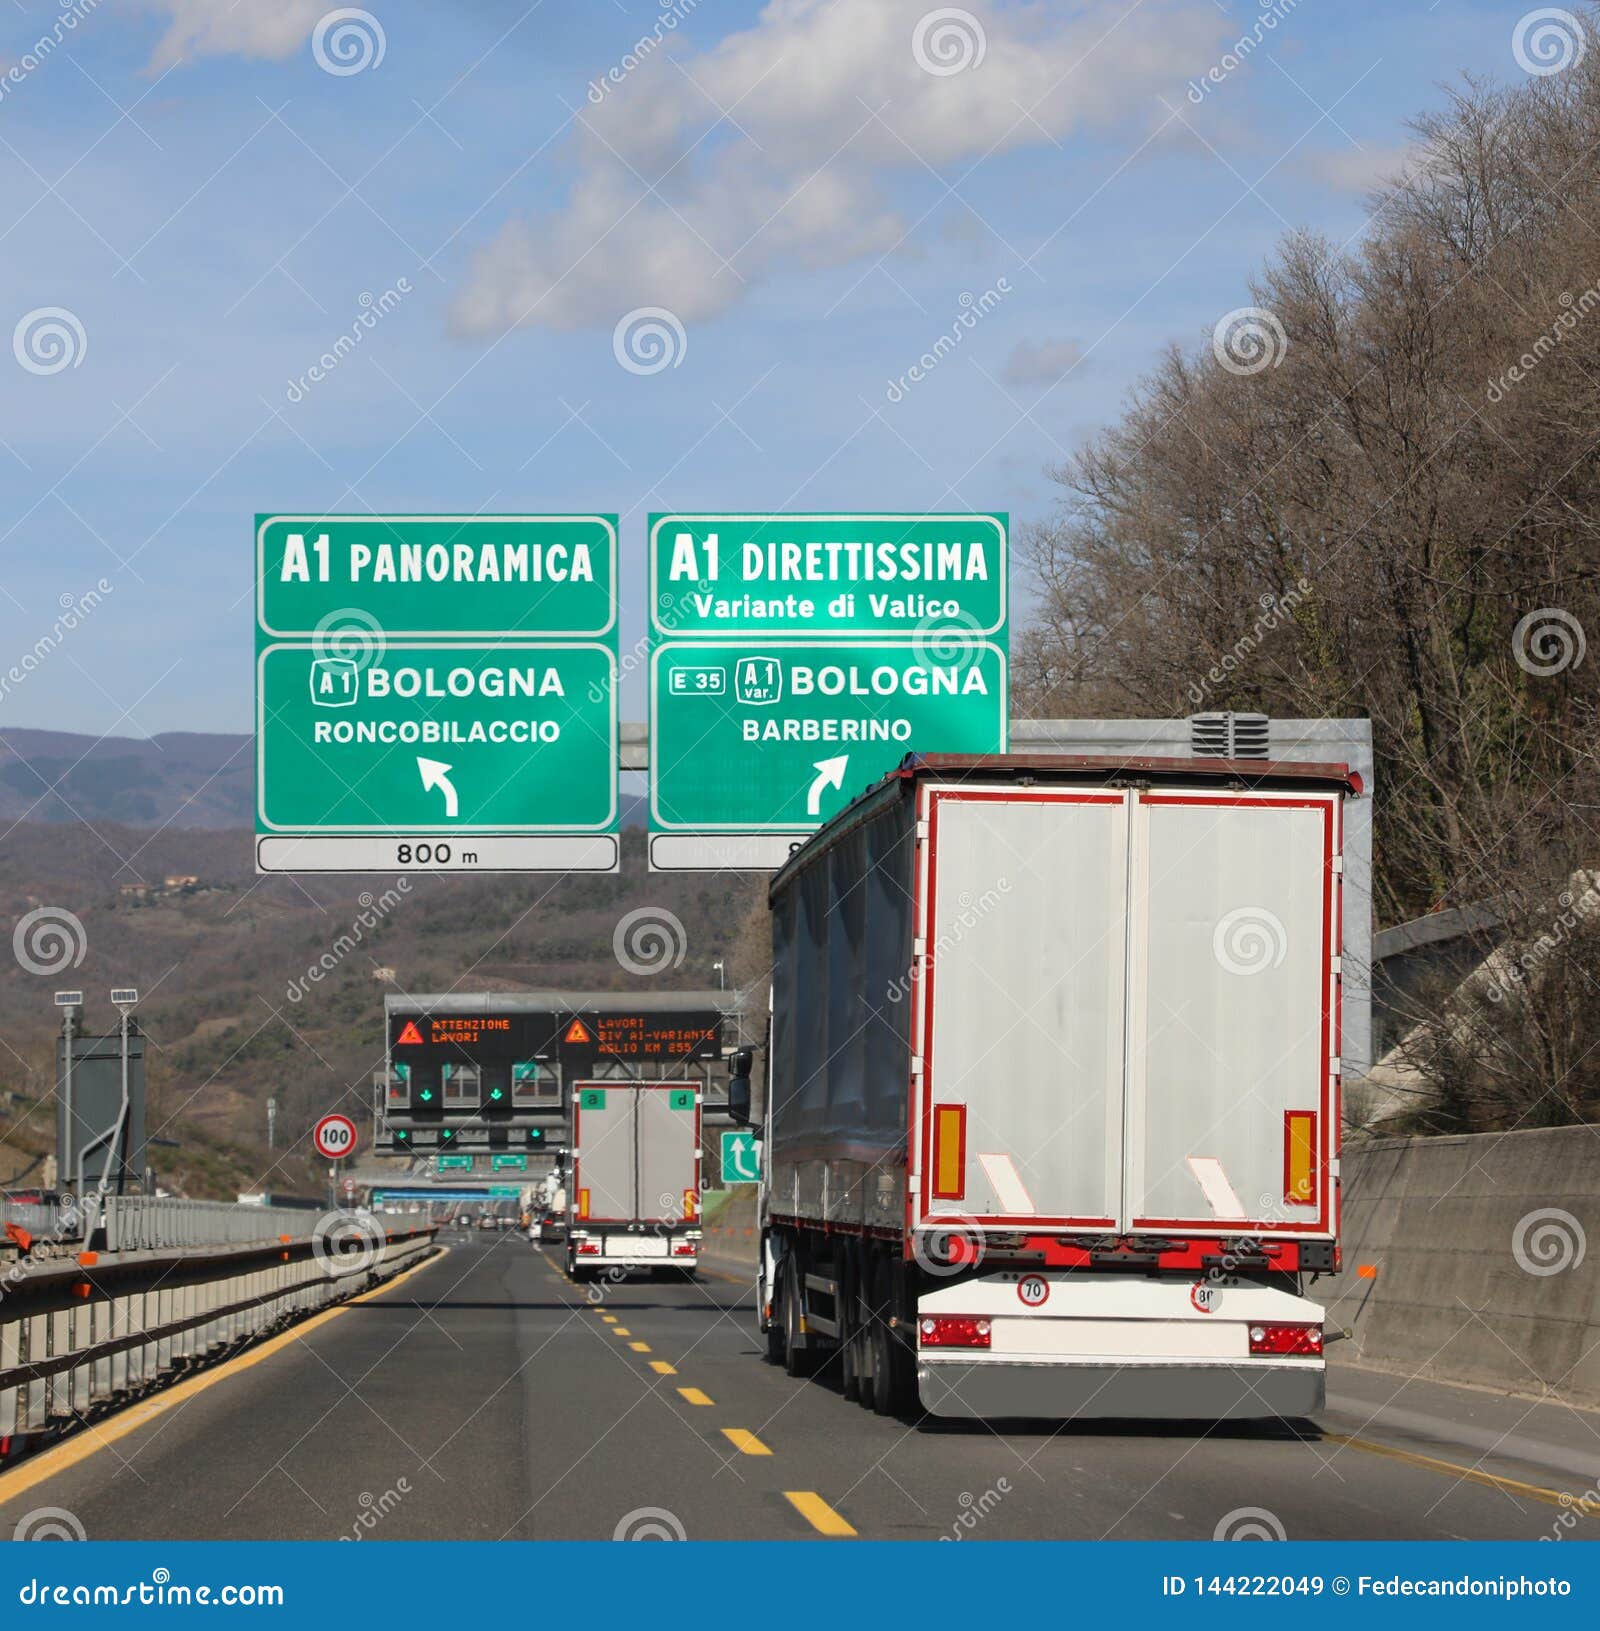 important road junction on central italy on the motorway